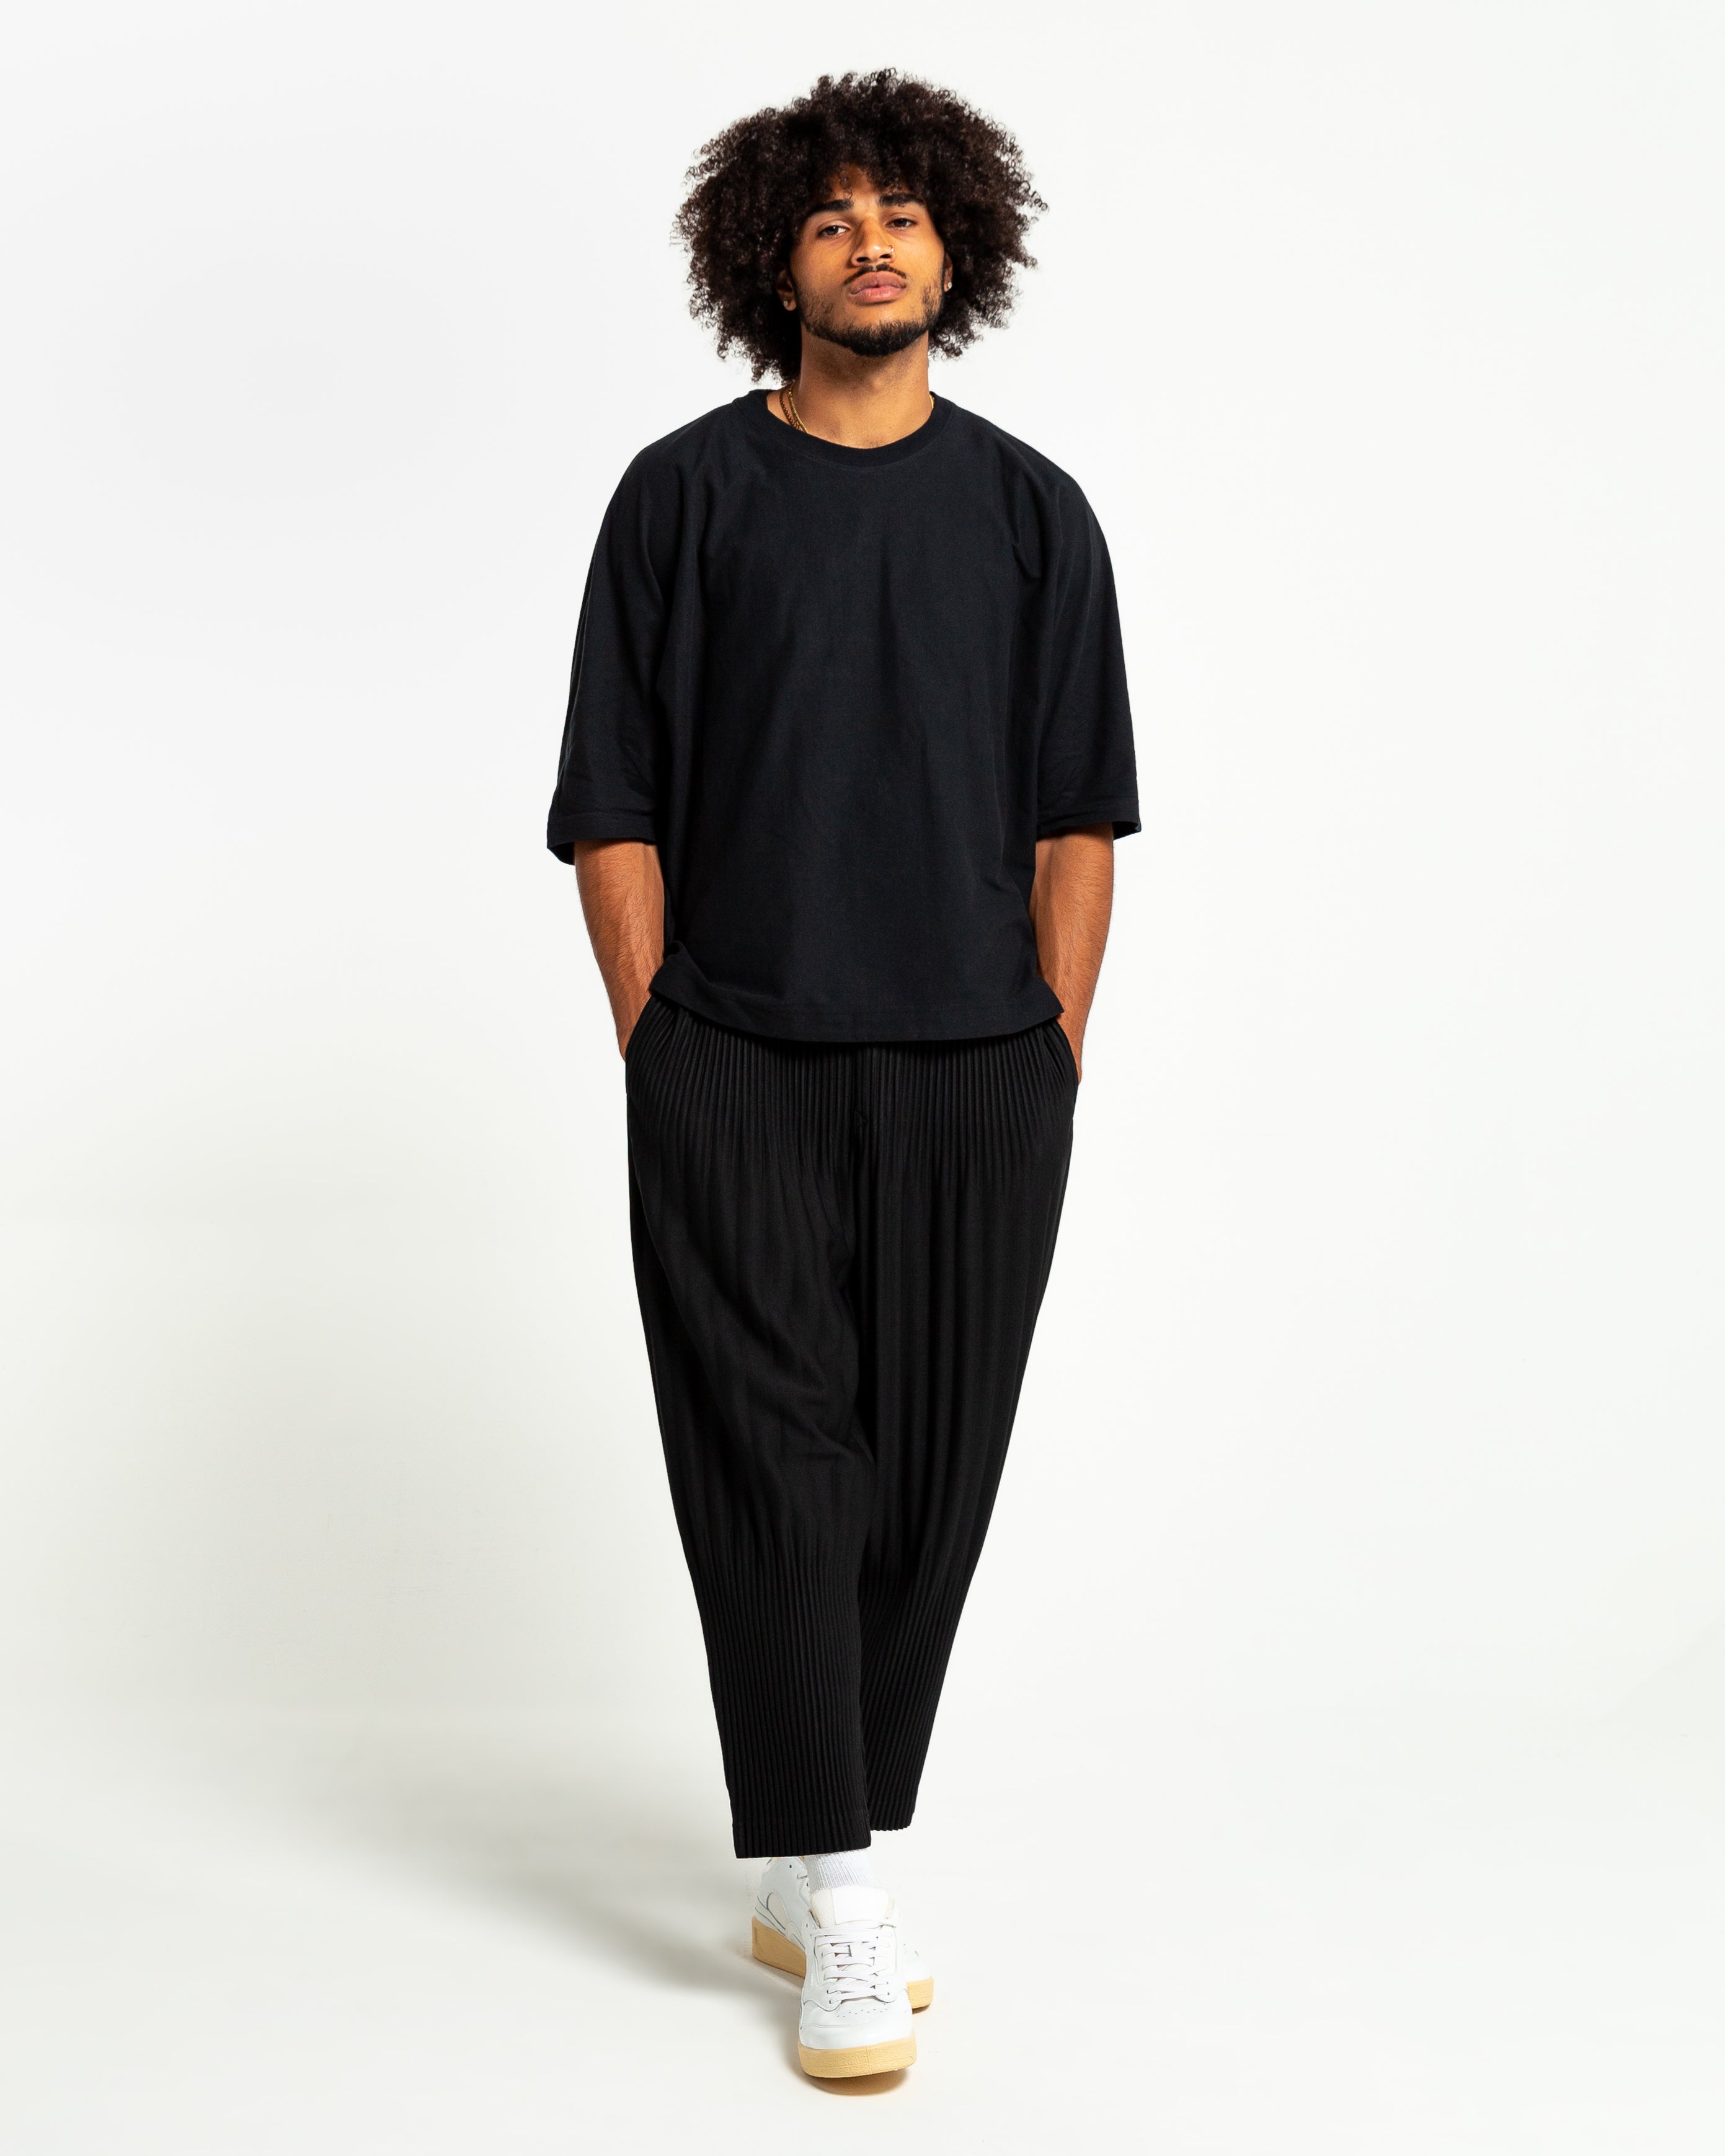 Neutral Technical-pleated trousers | Homme Plissé Issey Miyake | MATCHES UK